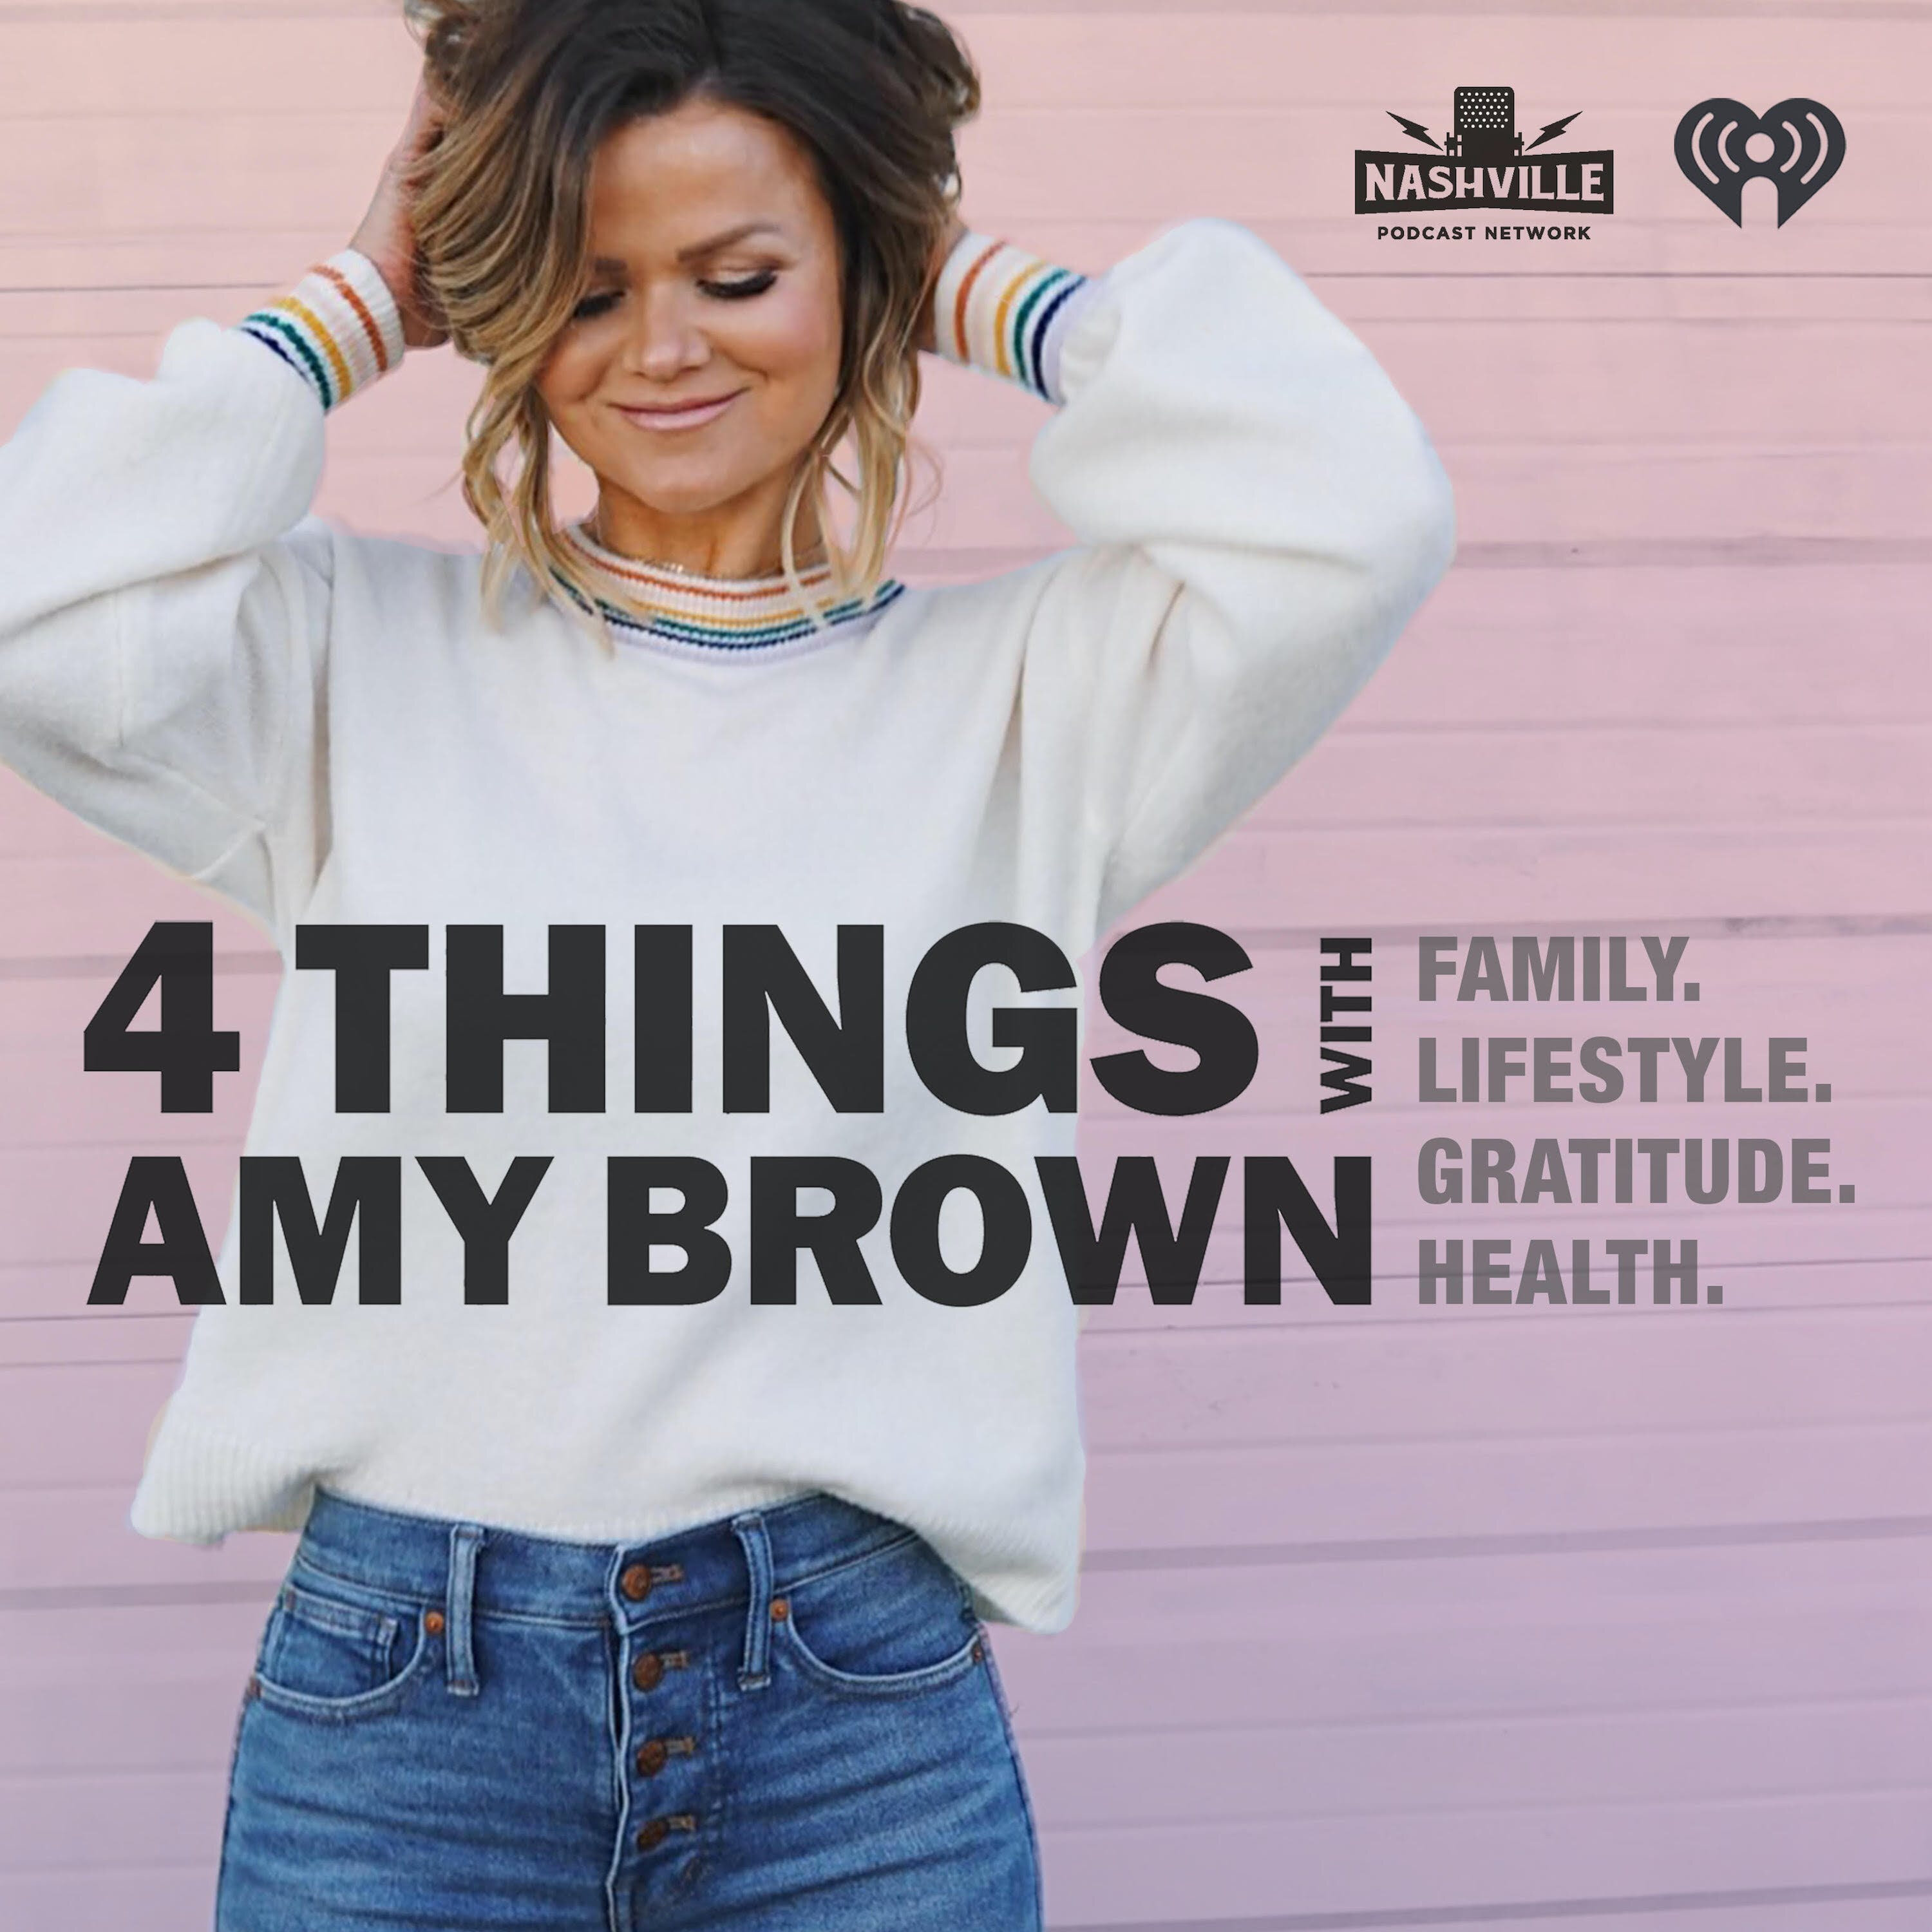 4 Things with Amy Brown podcast show image